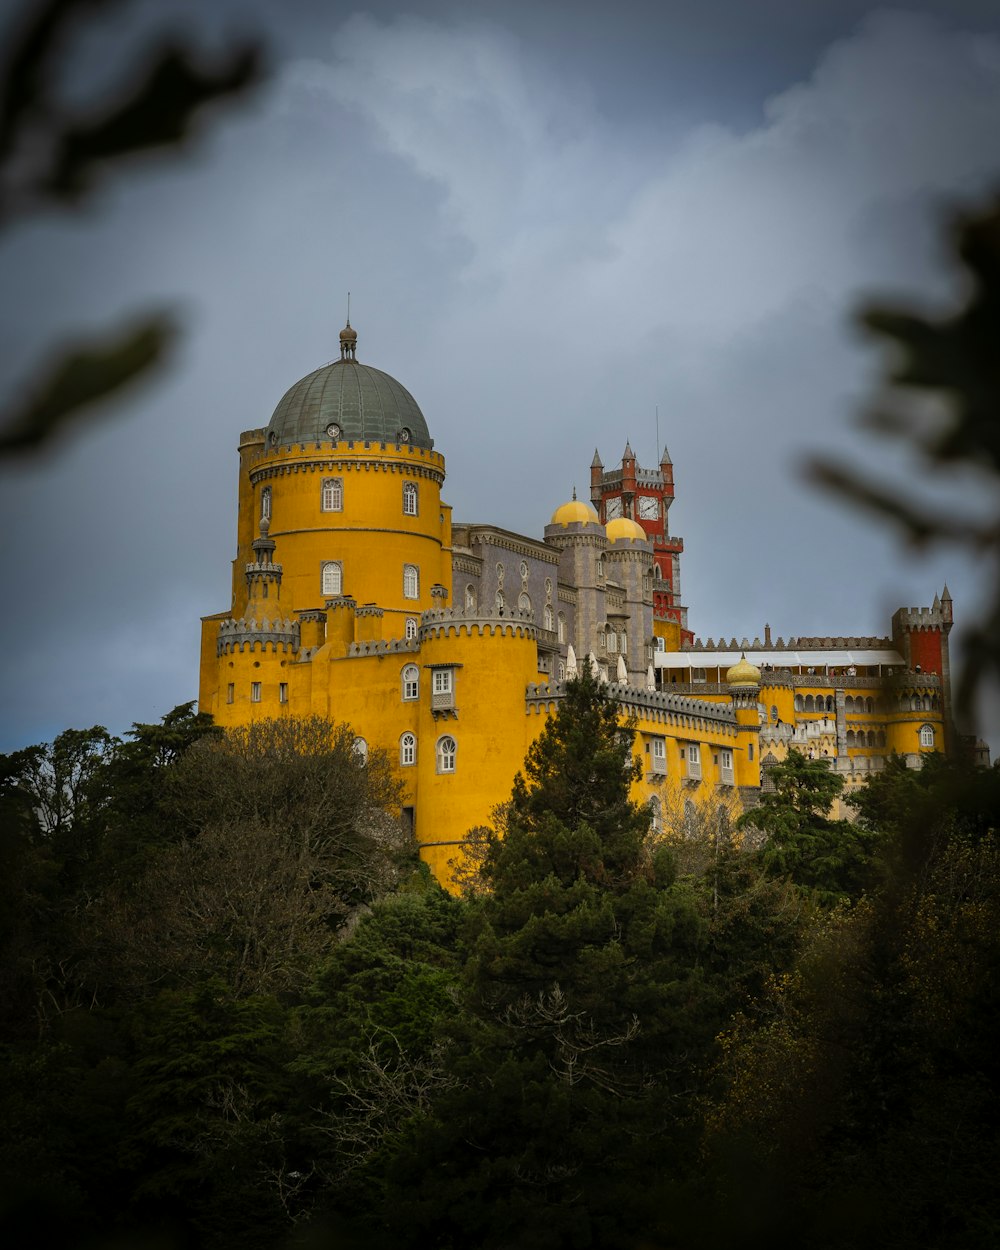 a large yellow castle with a clock tower on top of it